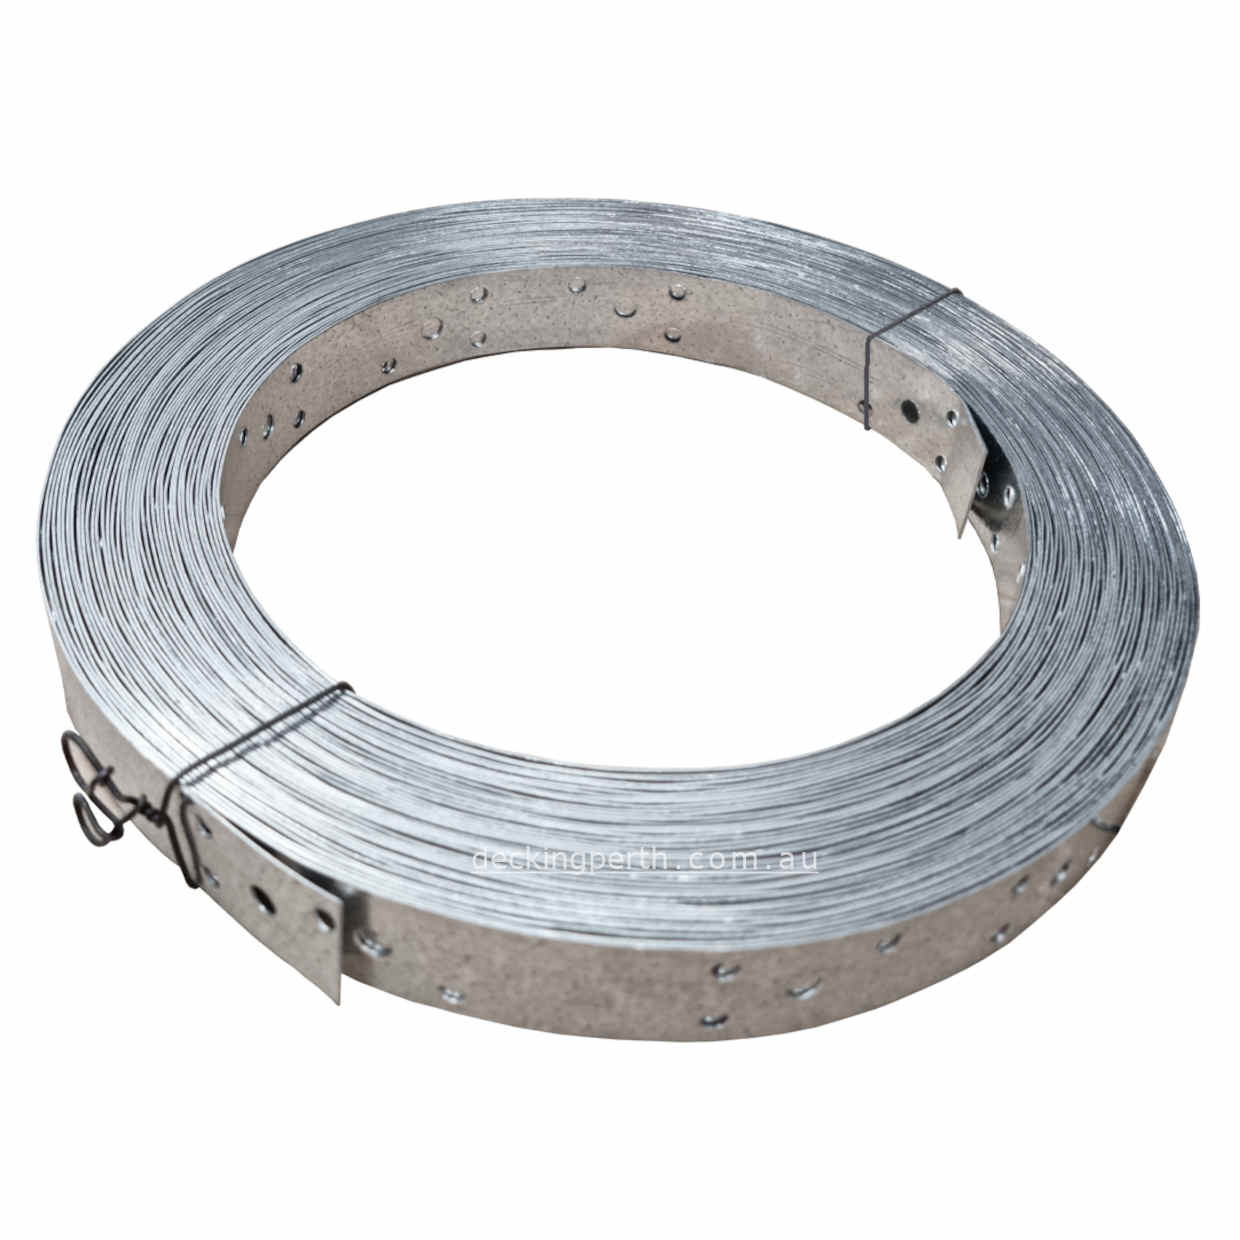 MAXI_METAL_Hoop_Iron_Strapping_30_1.0_30m_Decking_Perth